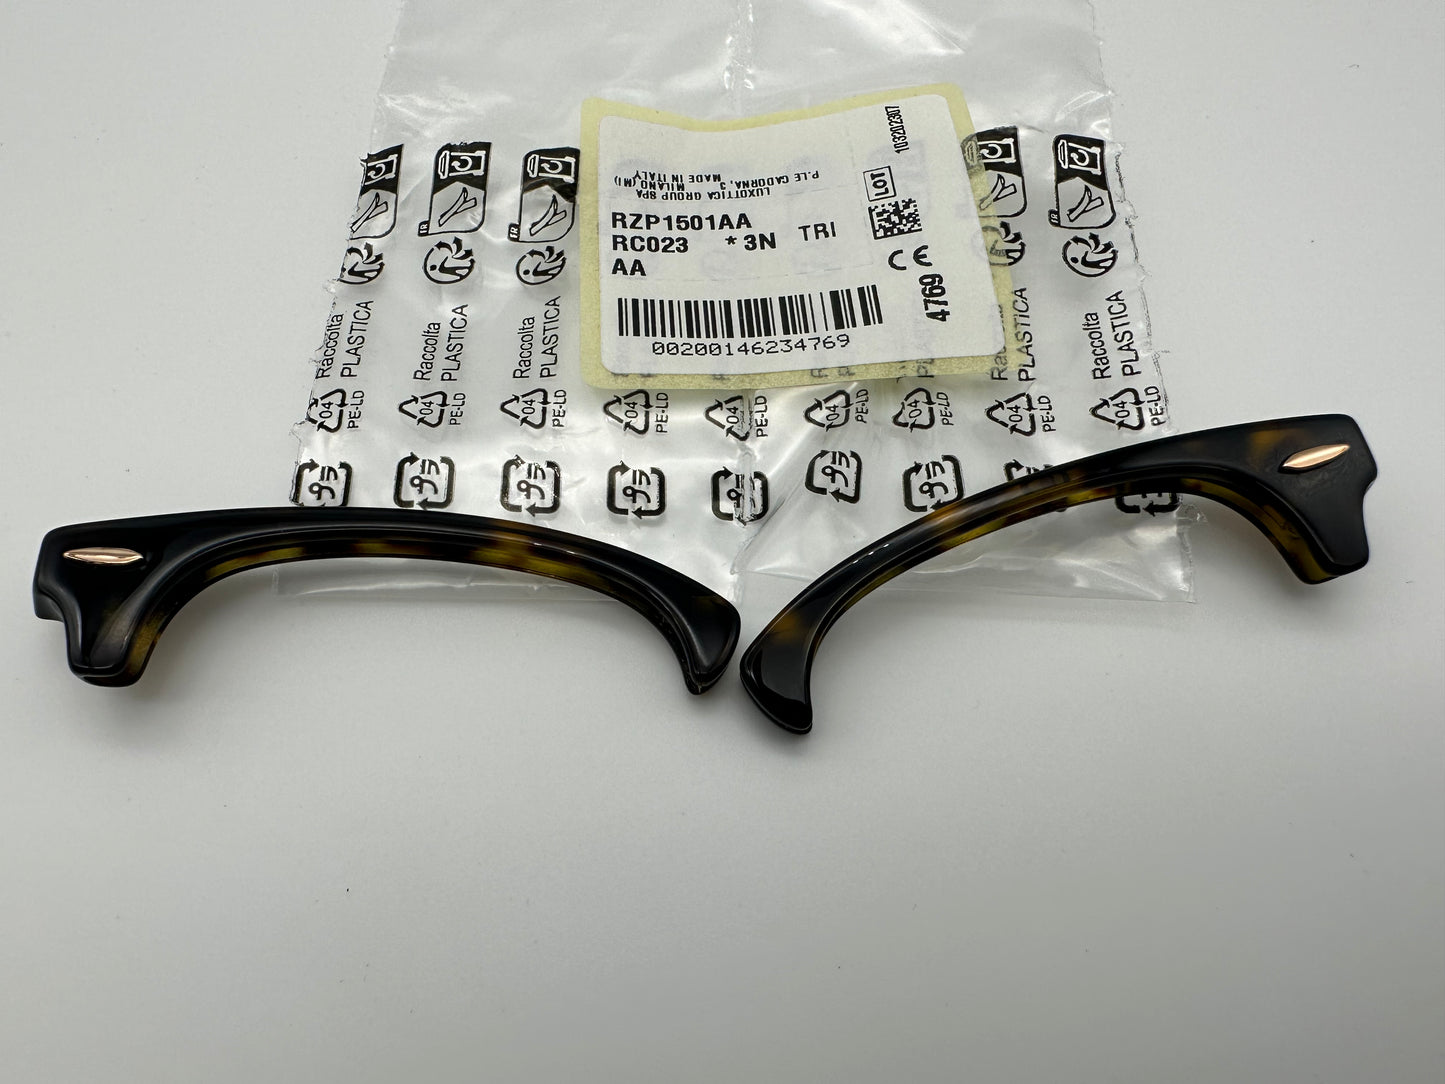 Genuine Ray Ban RB3016 Clubmaster Replacement Tortoise Front Browbars 51mm Authentic NEW